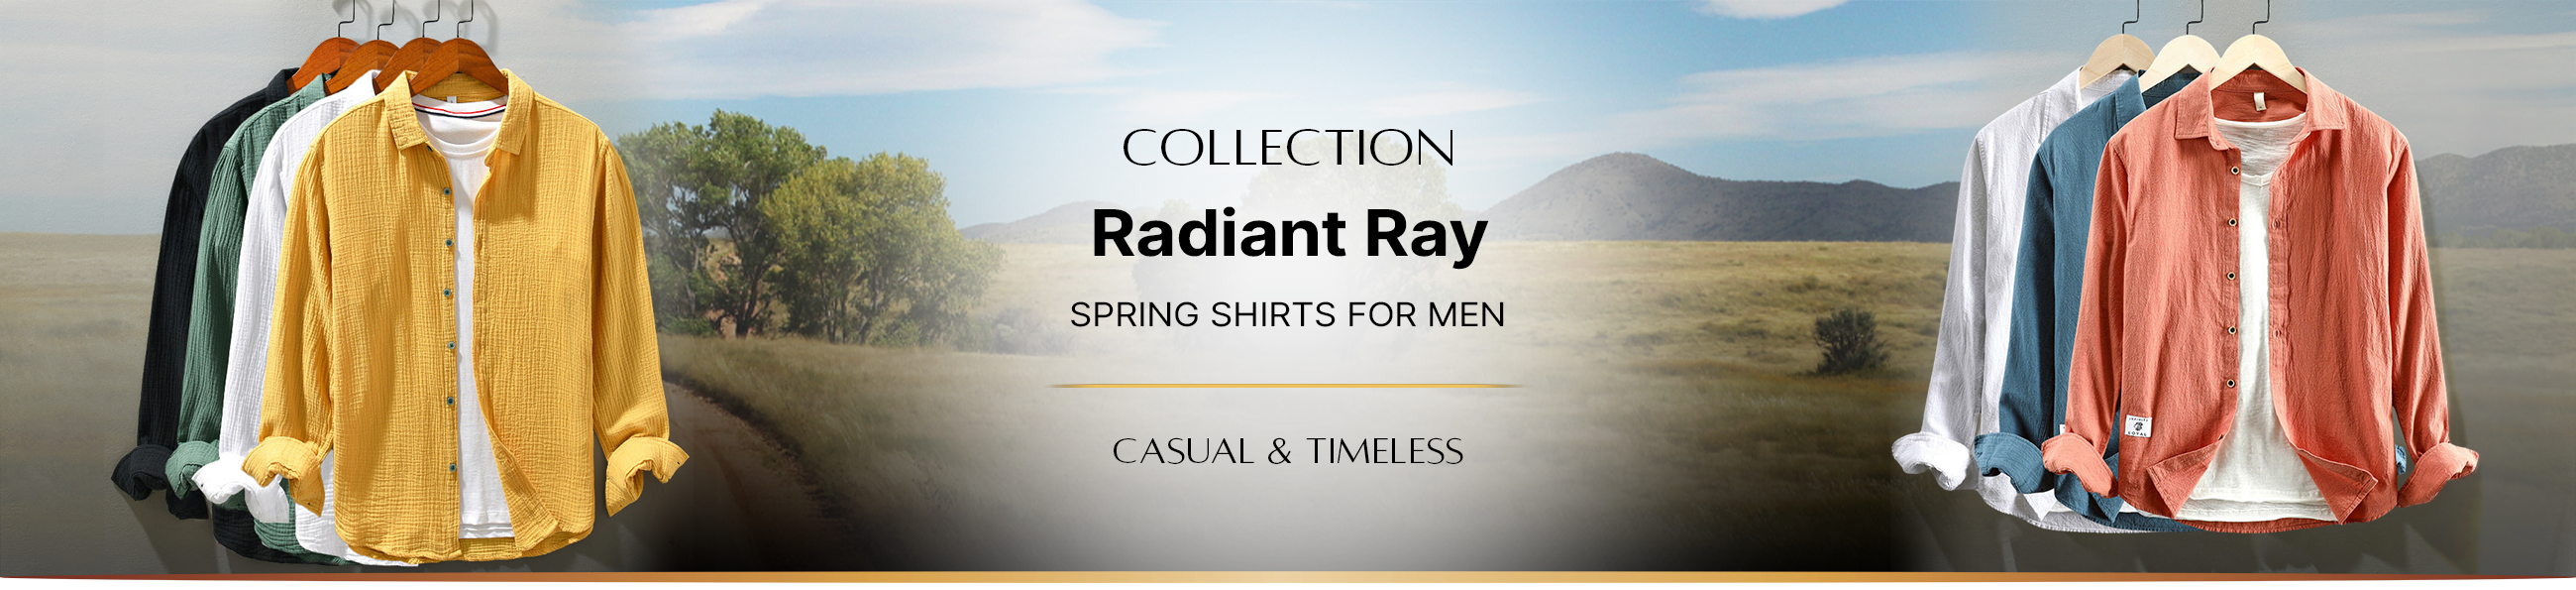 Radiant Ray Collection DESKTOP_BANNER.png__PID:dbe5ee4f-5020-4cb9-b684-5b631a061a1c